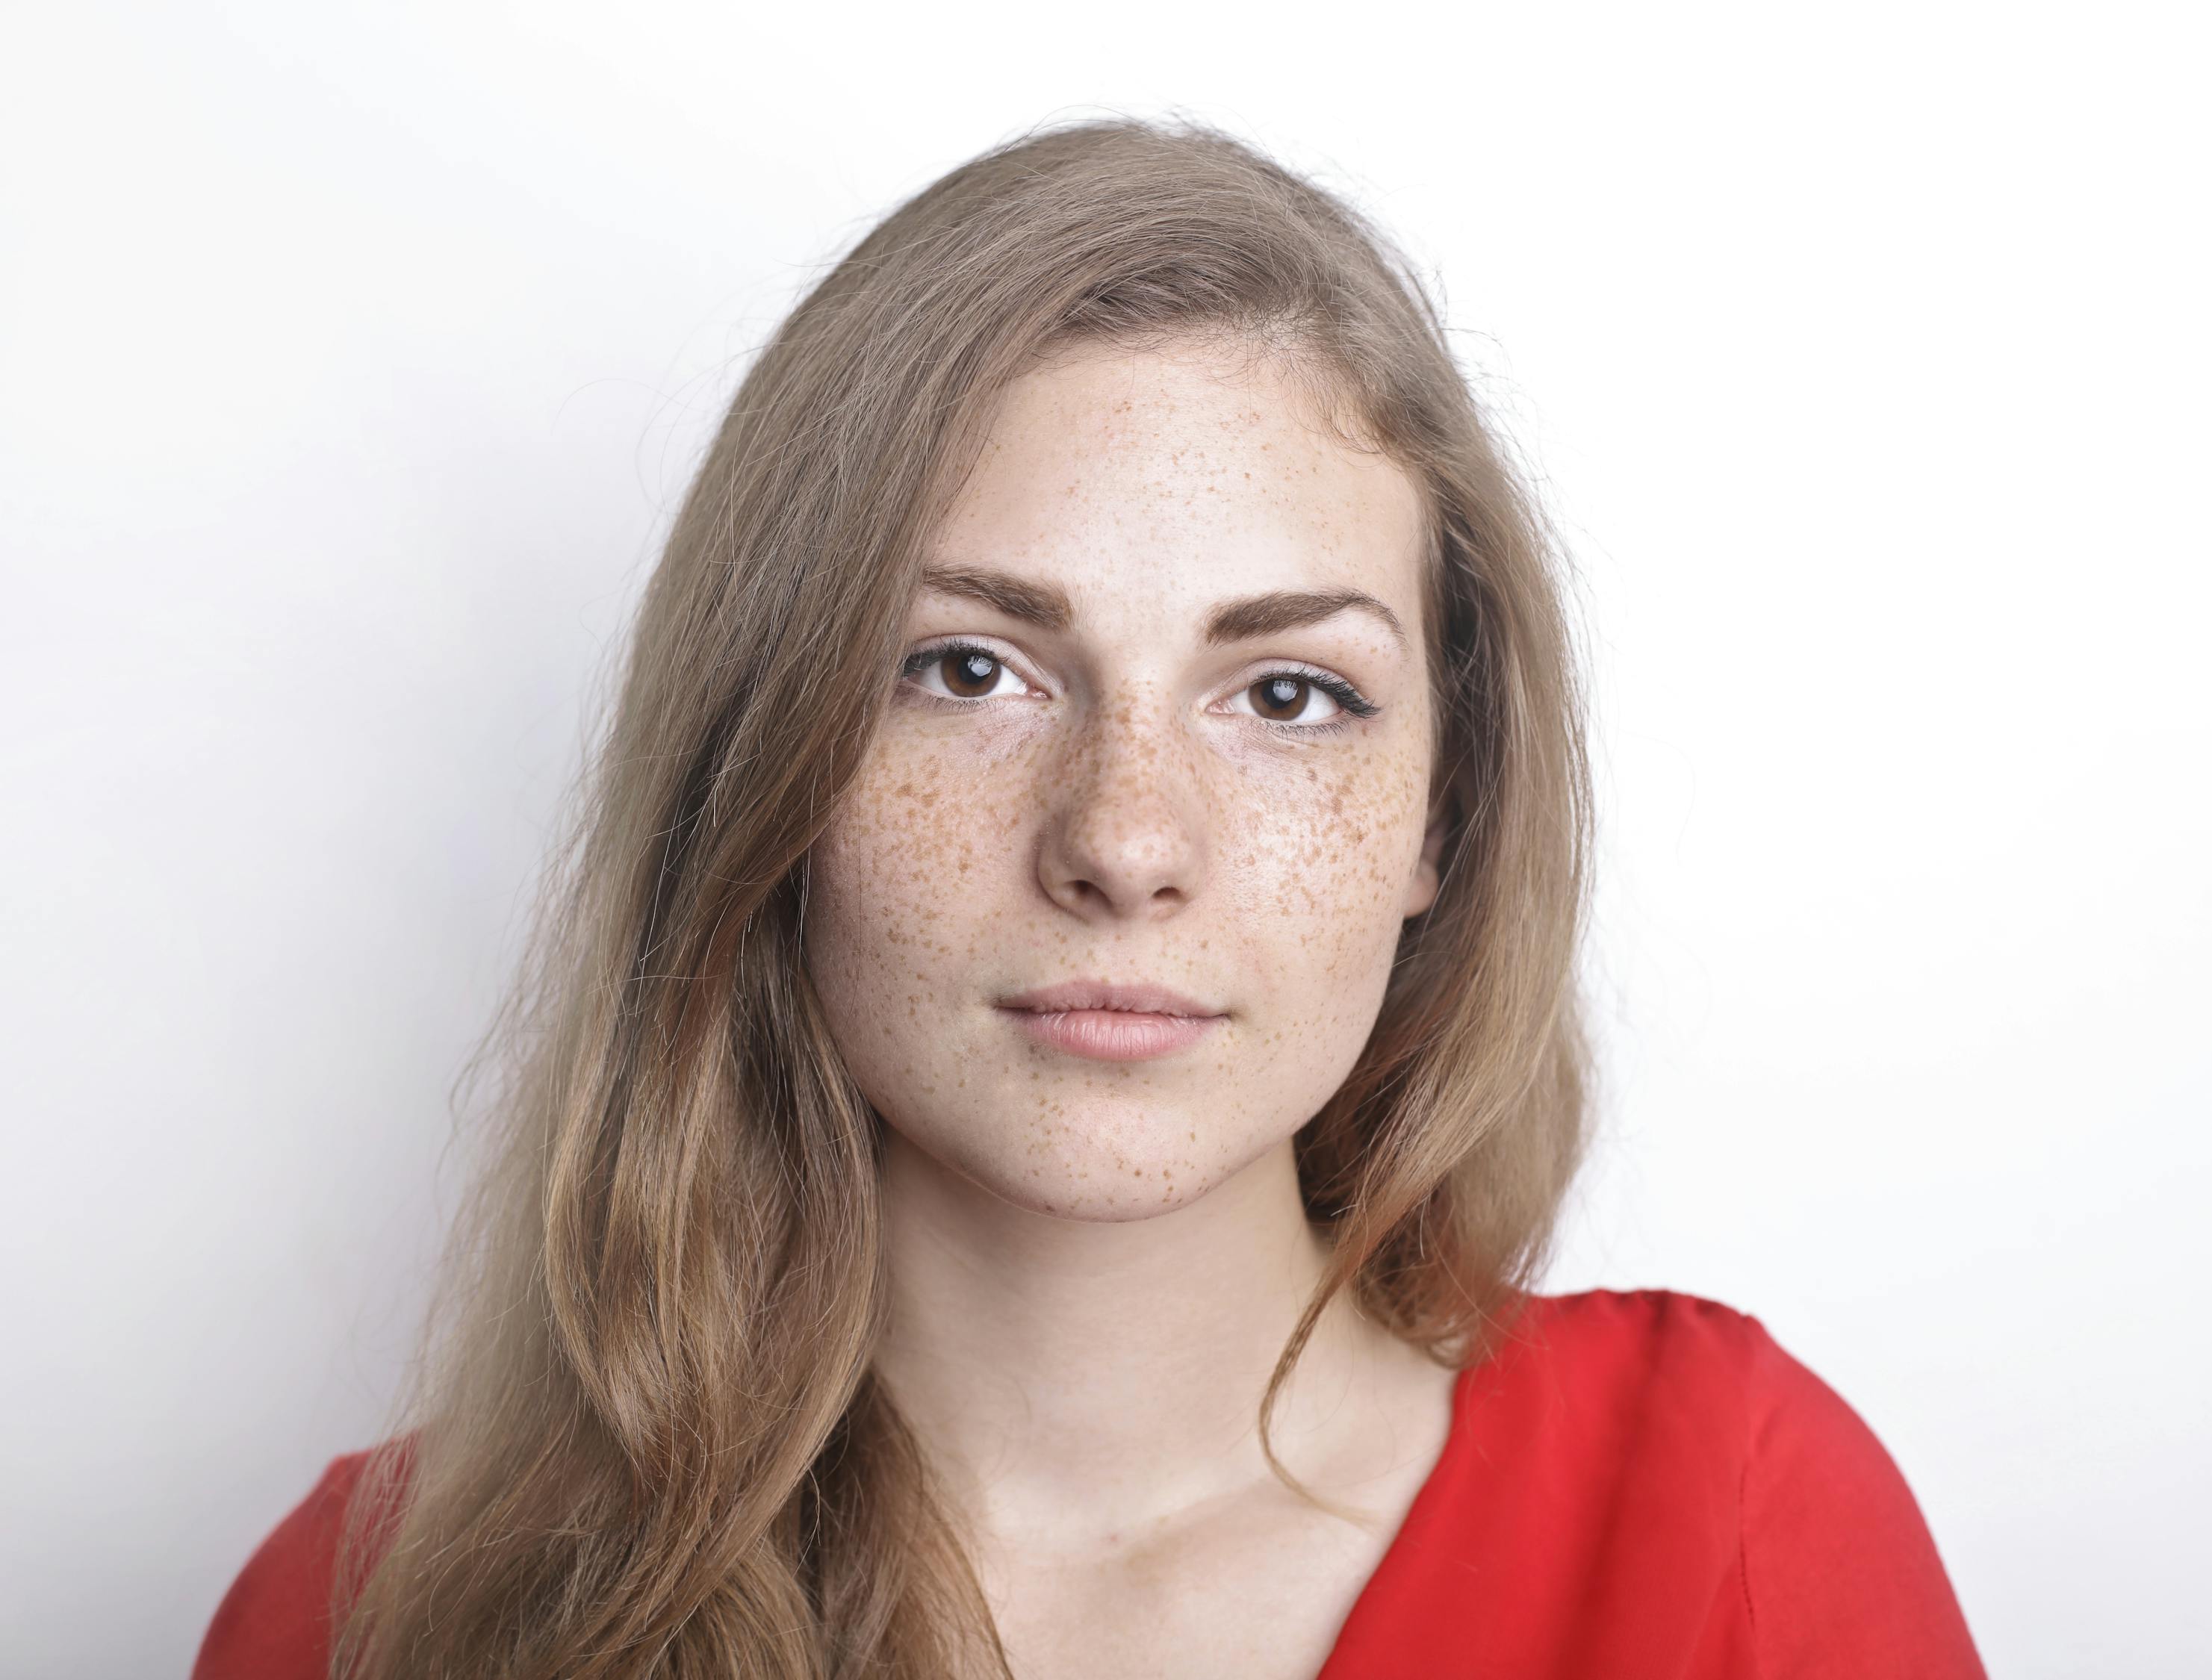 Portrait Photo of Woman With Freckles in a Red Top